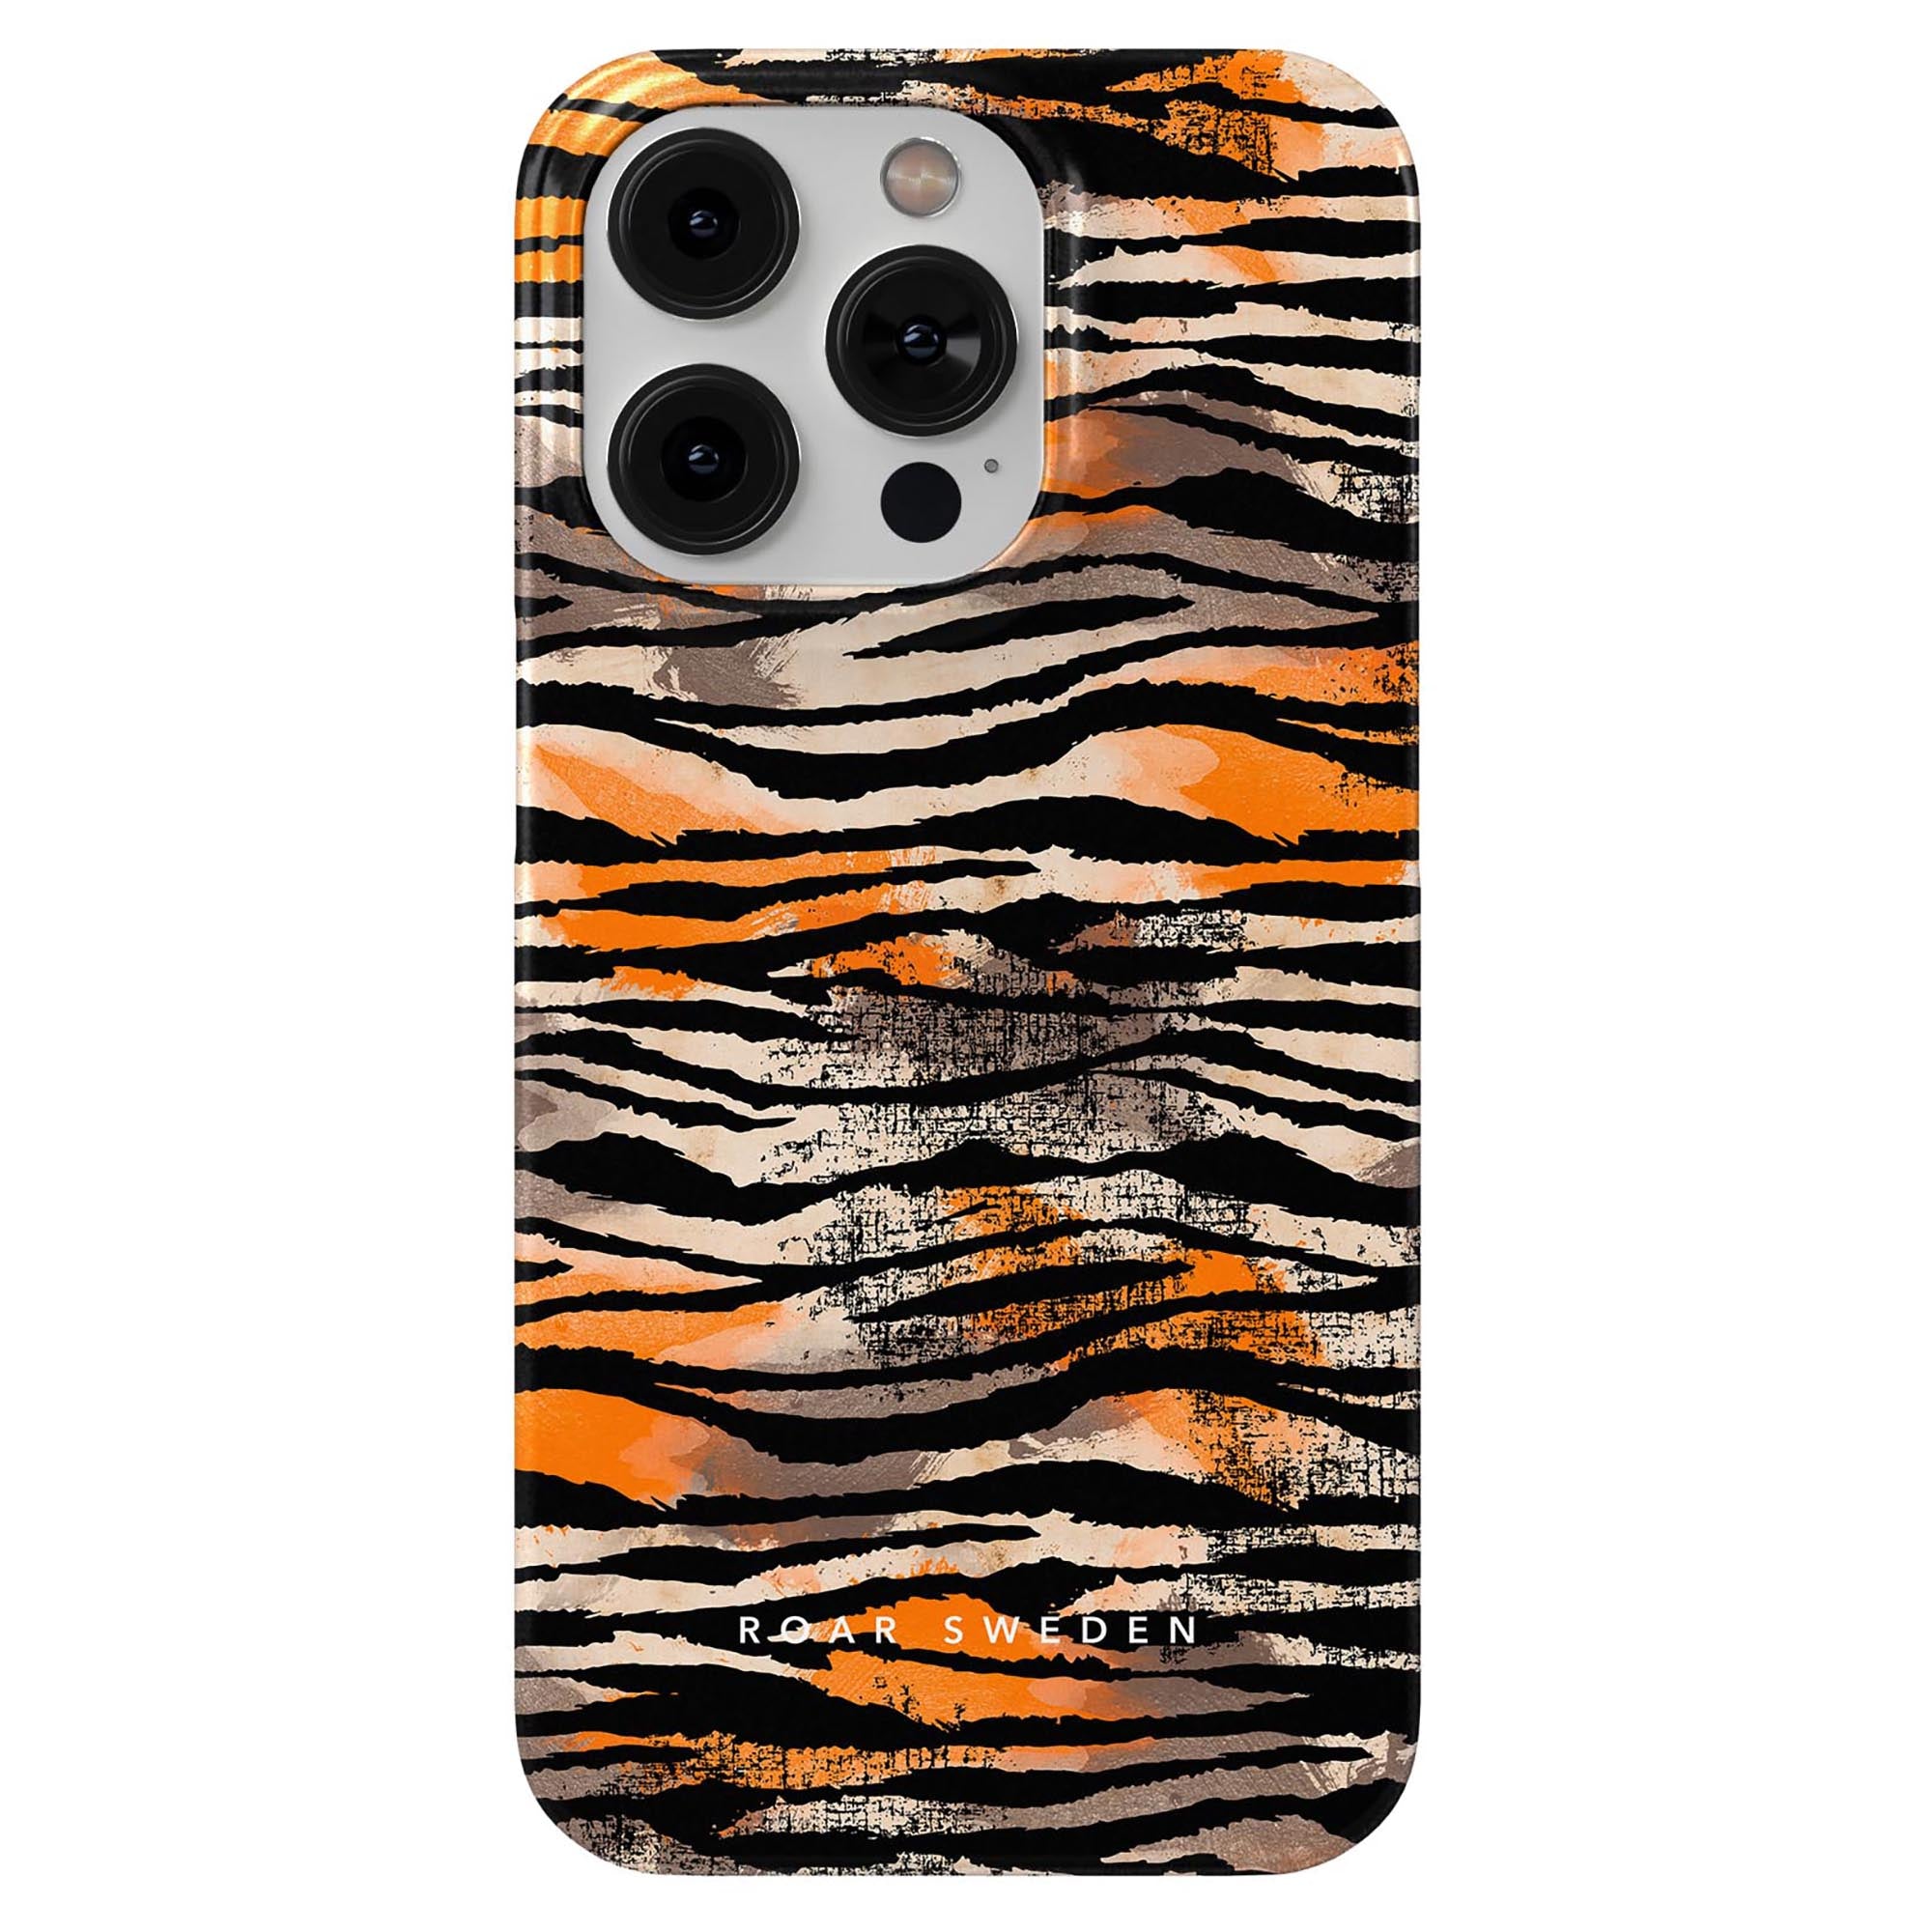 A stylish Sun Tiger - Slim case for the iPhone 11, providing protection and a unique design.